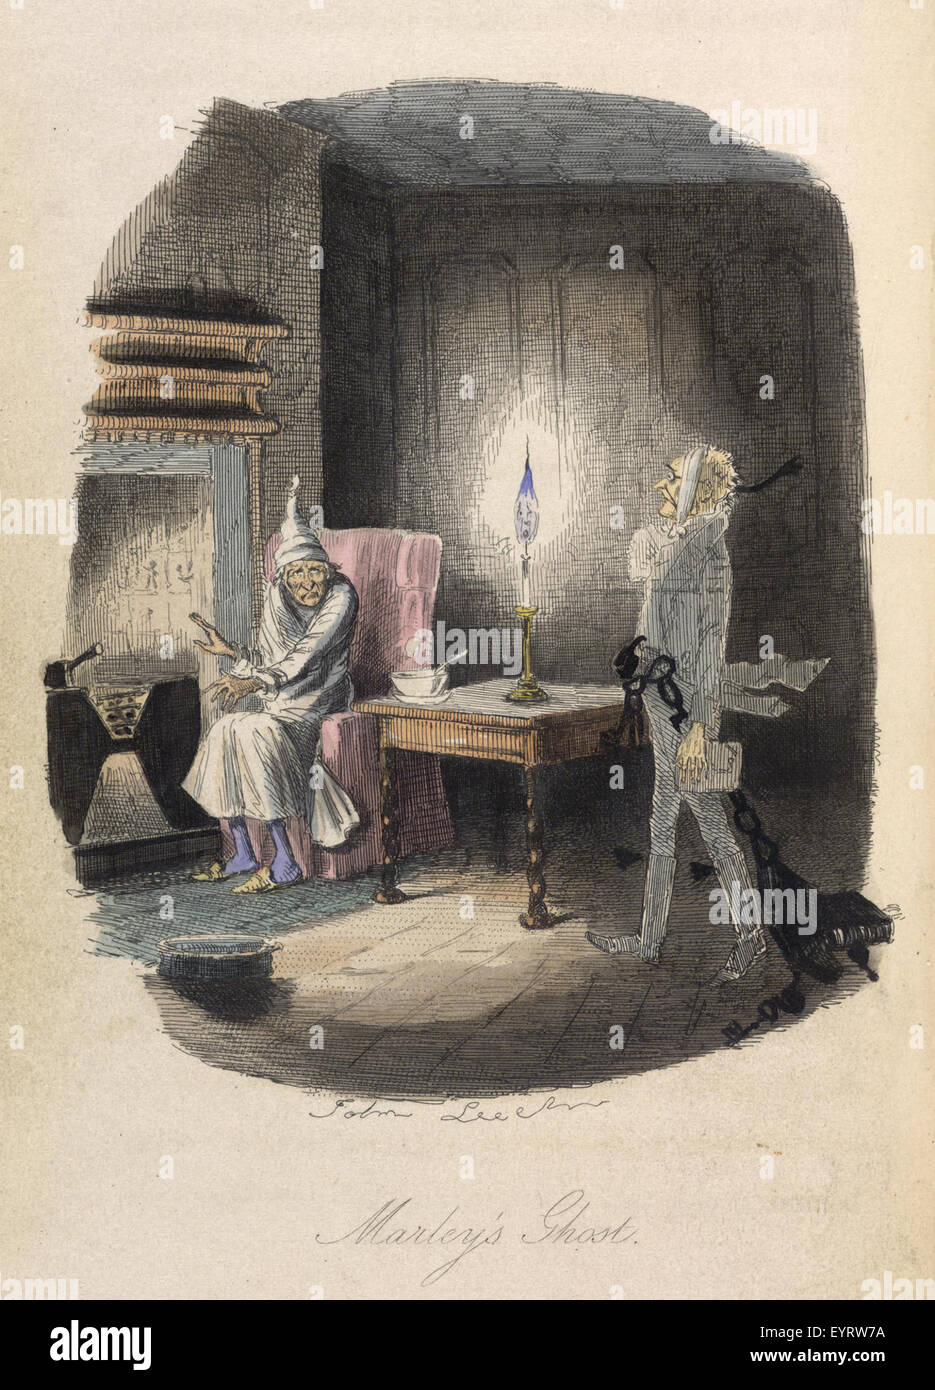 A Christmas Carol in prose. - caption: 'Marley's Ghost.  Ebenezer Scrooge visited by a ghost.' A Christmas Carol in prose - caption 'Marley's Ghost Stock Photo